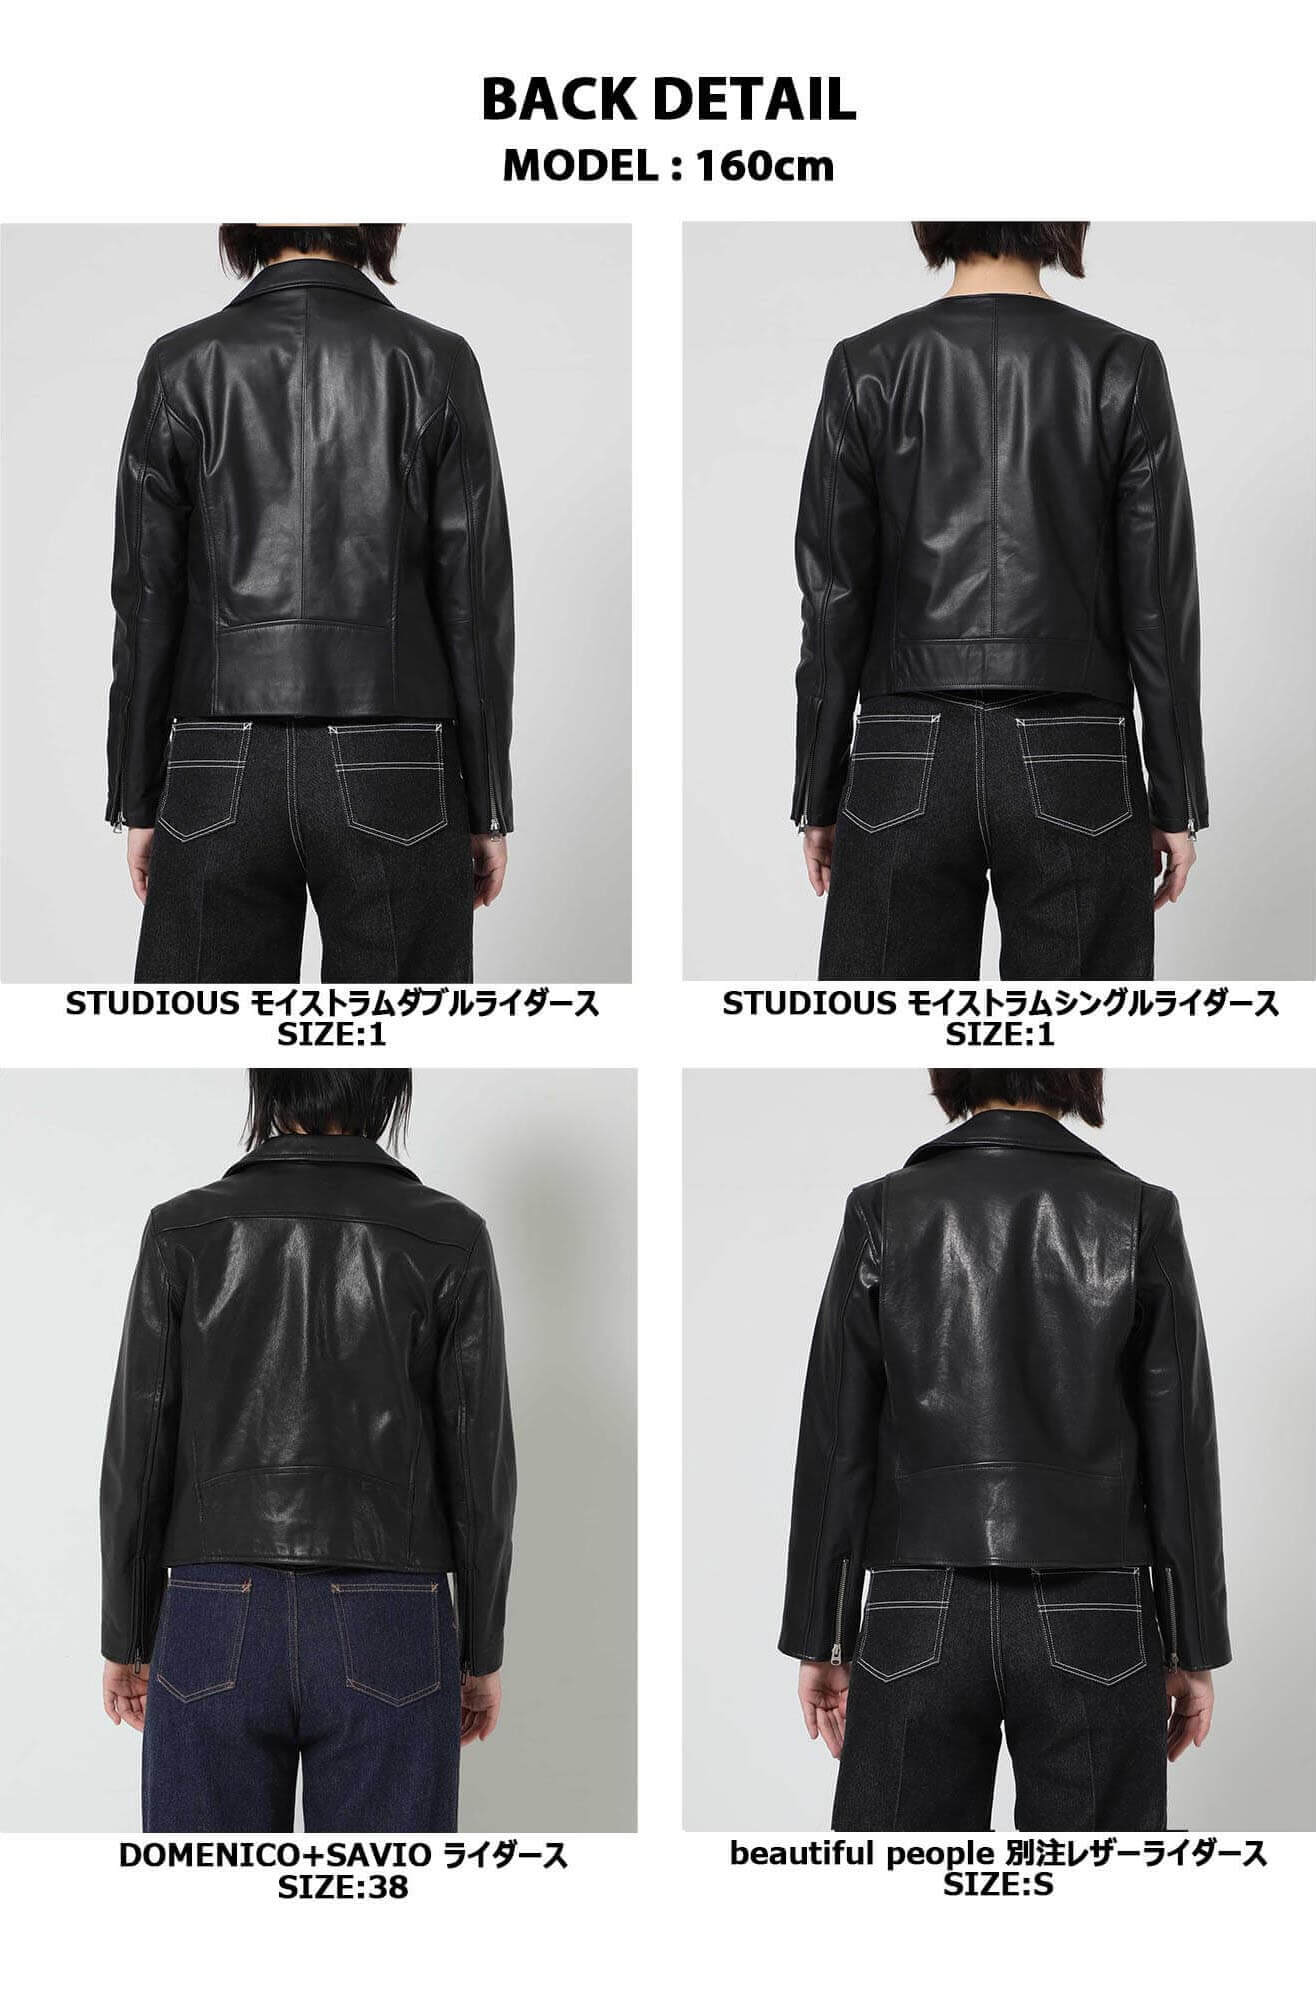 LEATHER COLLECTION 2020 A/W｜ STUDIOUS ONLINE公式通販サイト